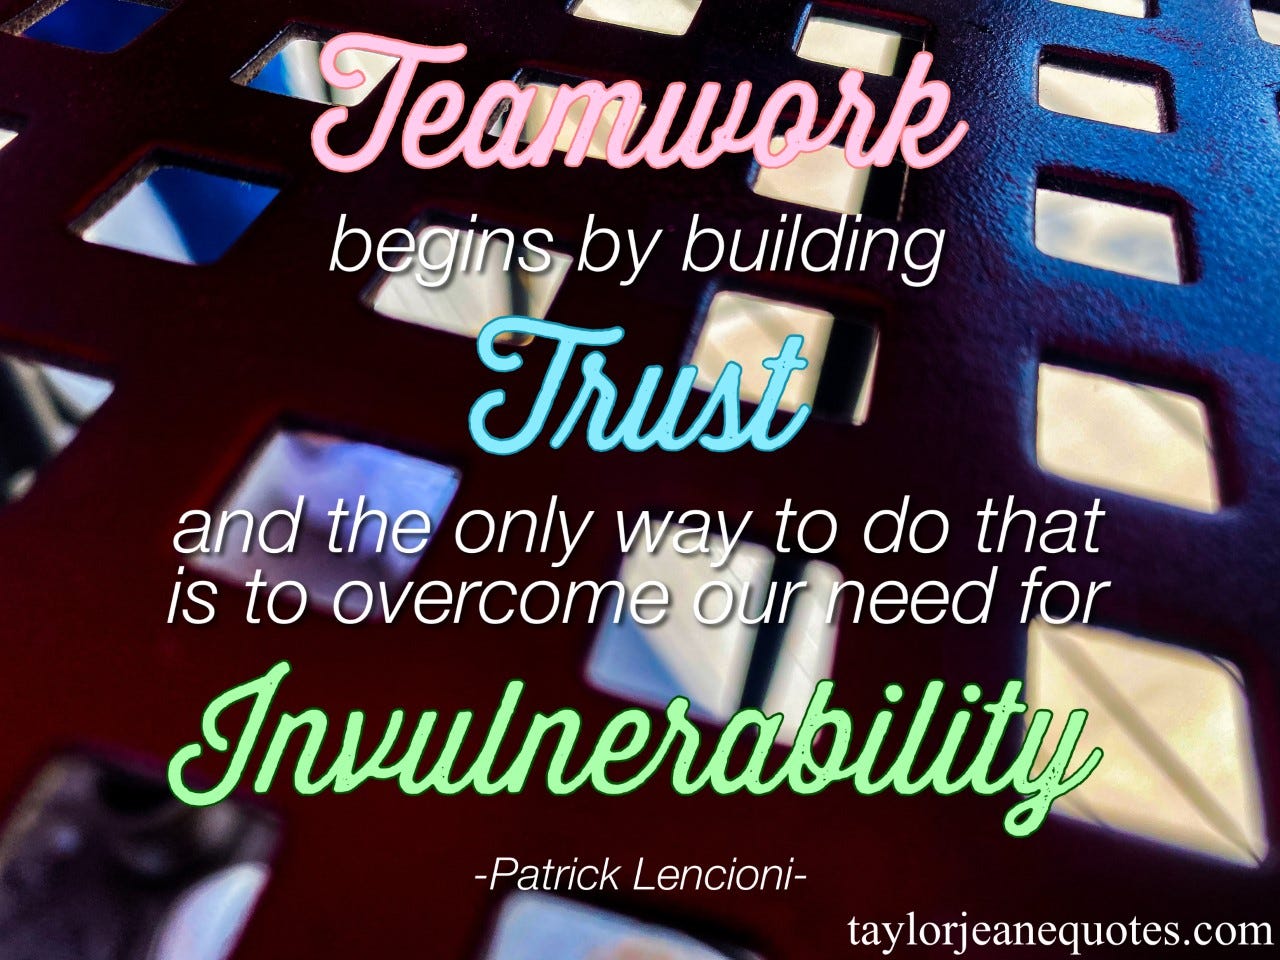 taylor jeane quotes, taylor jeane, taylor wilson, free quote of the day email subscription, daily motivational quotes, small business, patrick lencioni, patrick lencioni quotes, teamwork quotes, trust quotes, vulnerability quotes, invulnerability quotes, goal quotes, inspirational quotes, motivational quotes, life quotes, goal quotes, achievement quotes